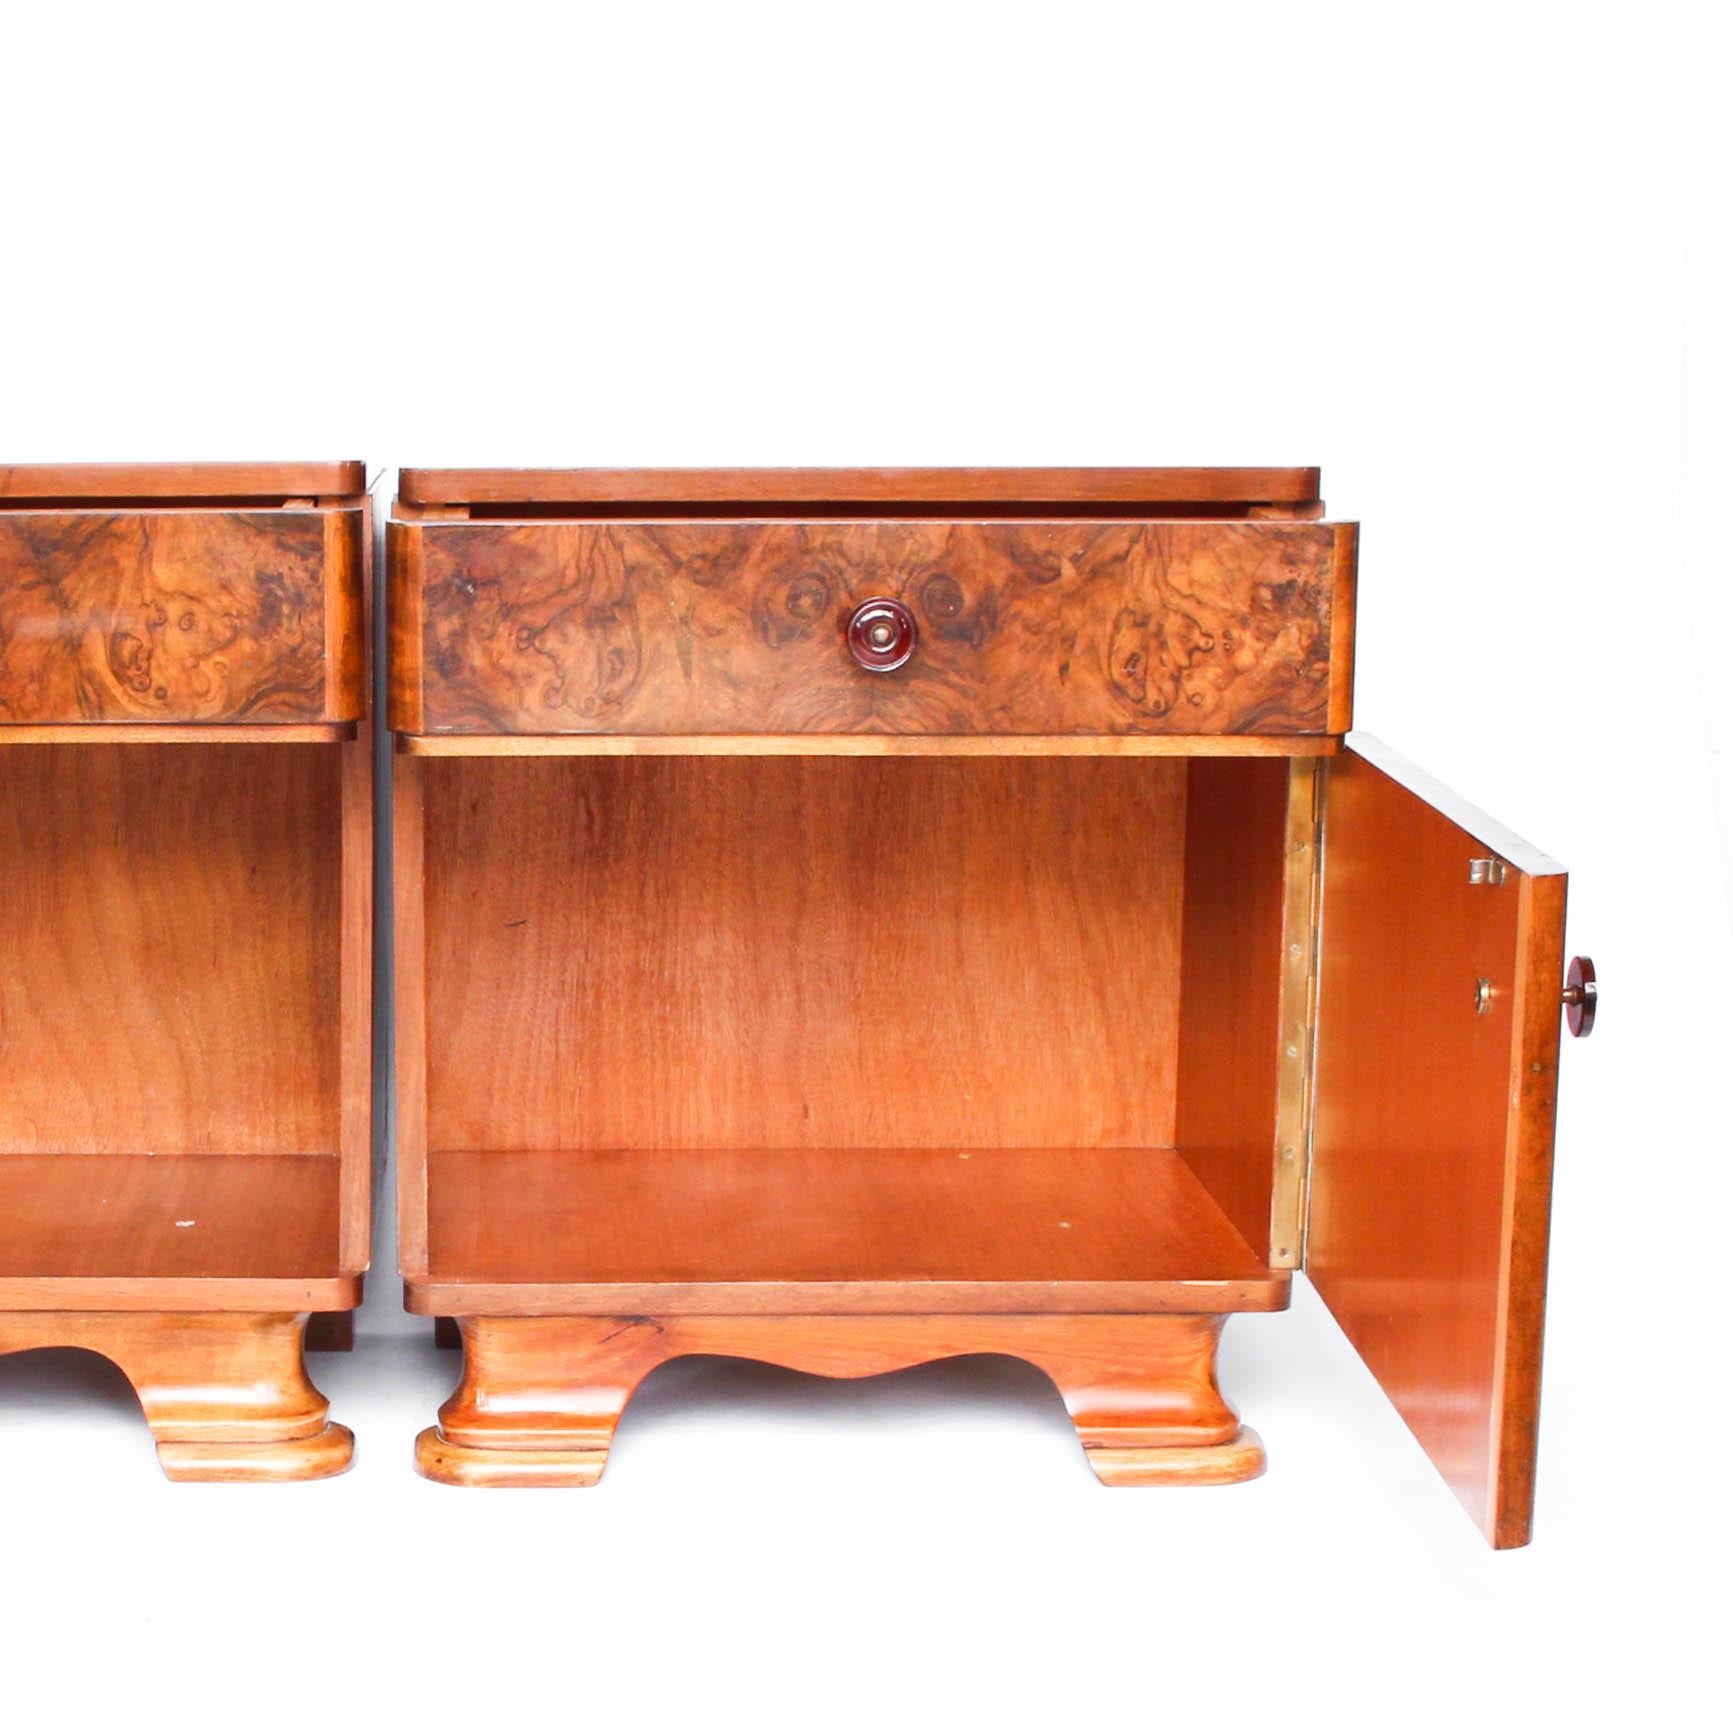 A pair of French walnut bedside cabinets in straight grain walnut veneer to sides, figured walnut tops and burr walnut veneer to fronts. Original brass and bakelite handles. 

Dimensions: H. 60cm W. 52cm D. 38cm

Origin: French

Date circa